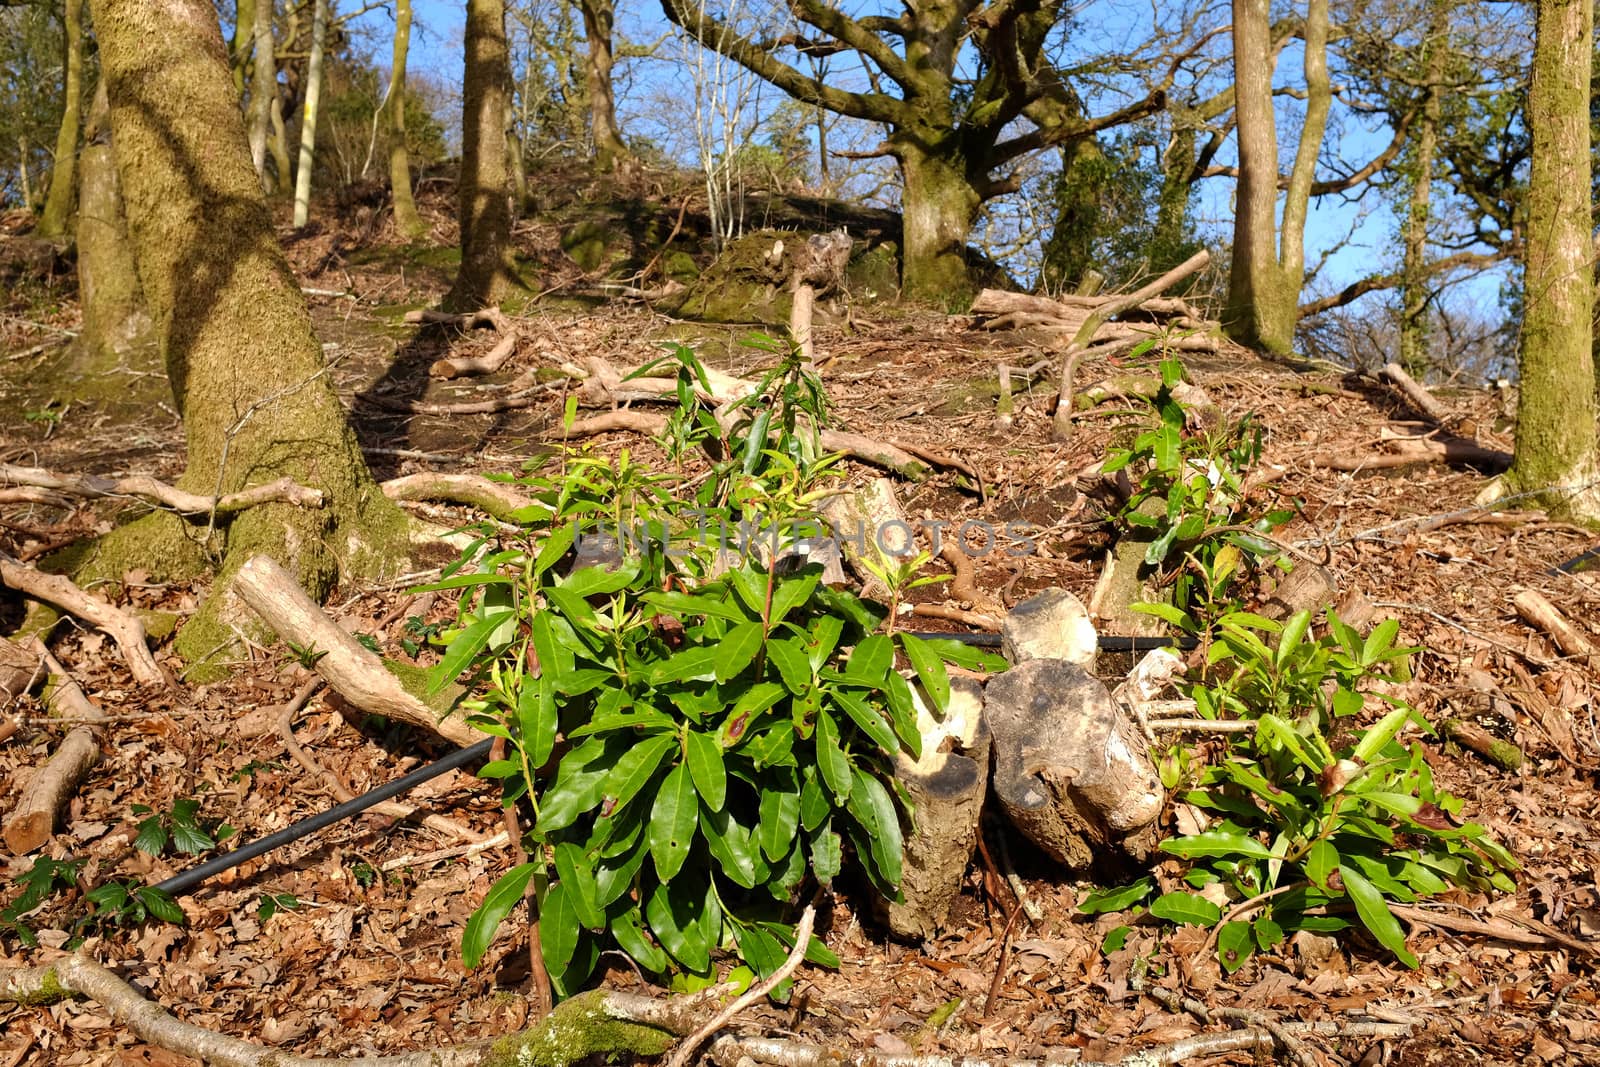 Reemerging rhododendron. by richsouthwales